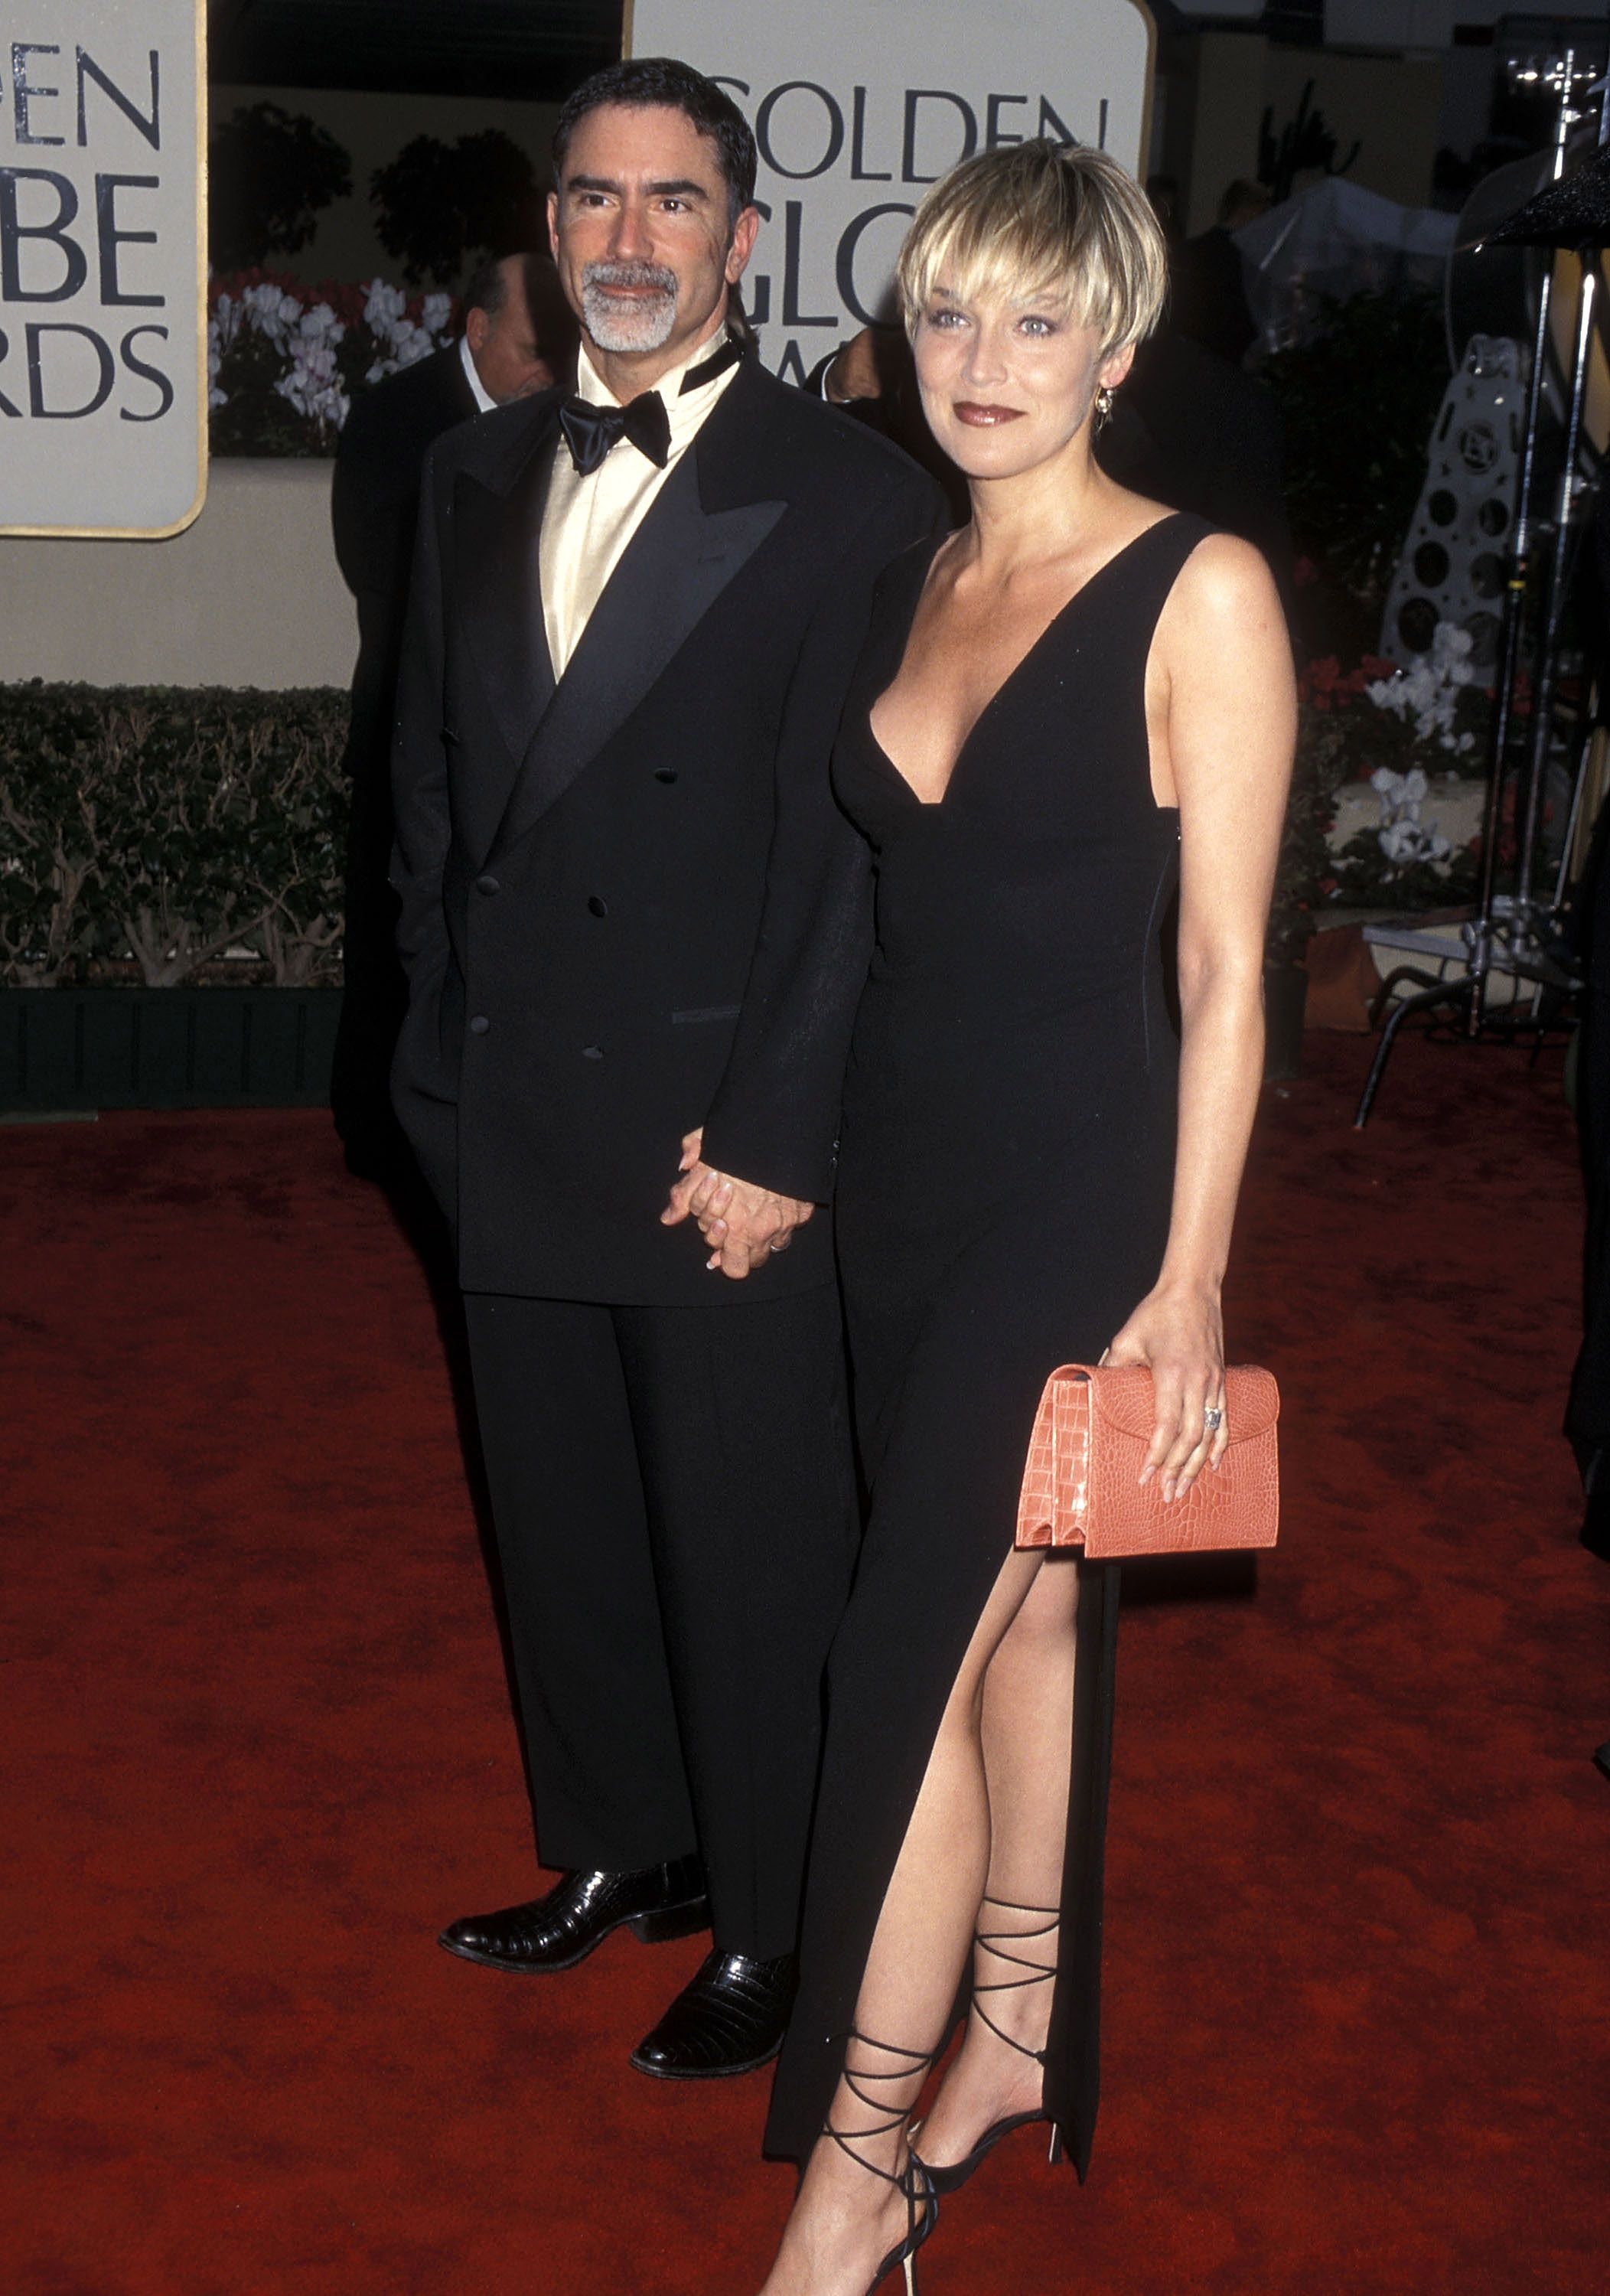 Sharon Stone and Phil Bronstein at the 57th Annual Golden Globe Awards in 2000 in Beverly Hills, California | Source: Getty Images